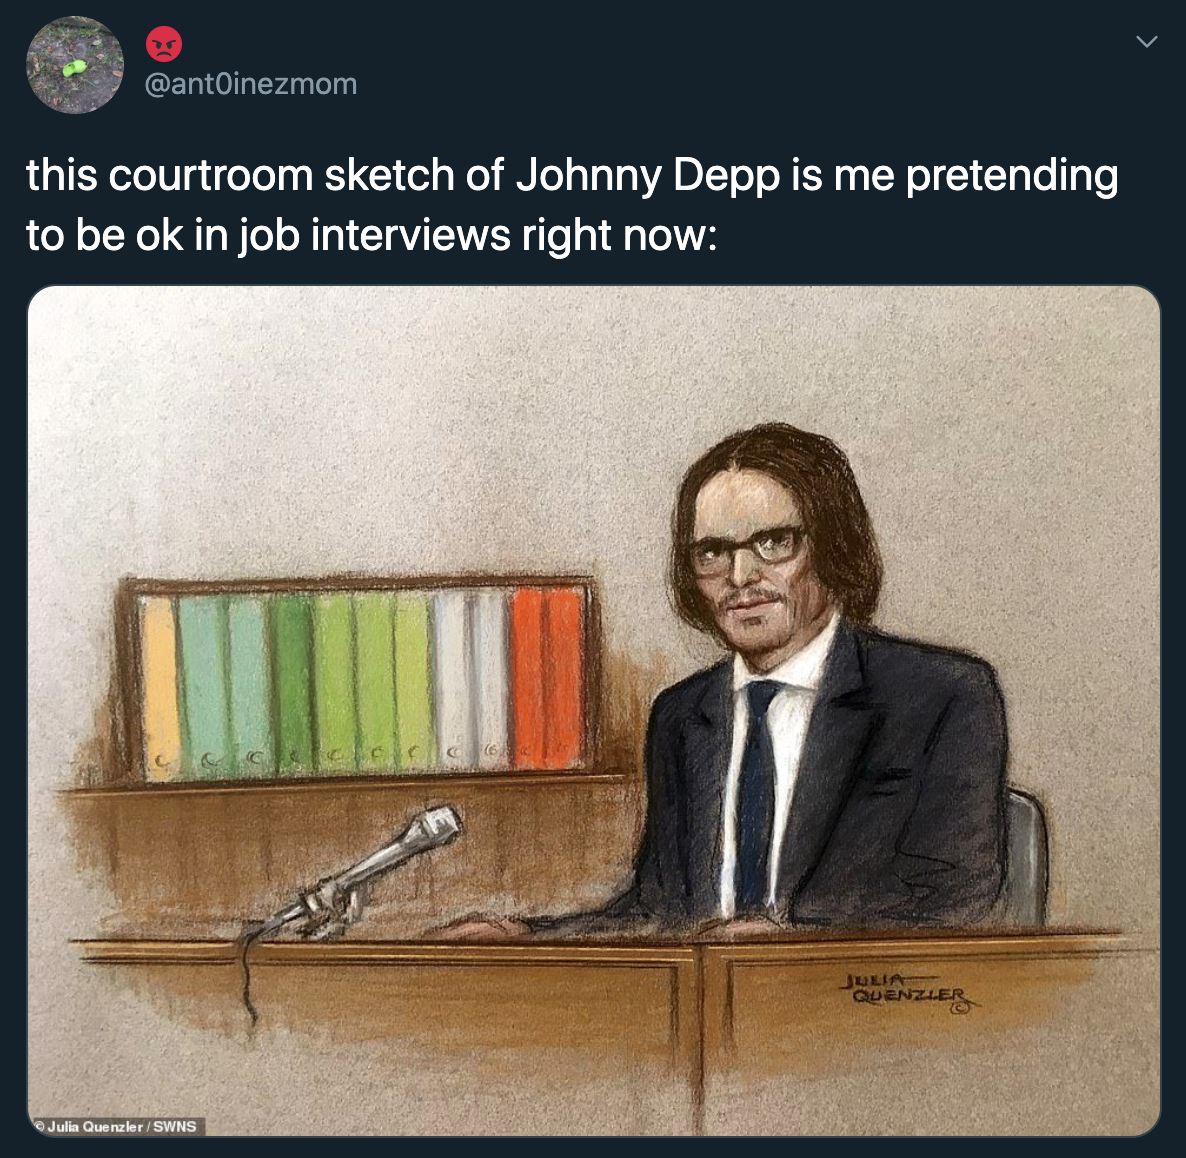 this courtroom sketch of Johnny Depp is me pretending to be ok in job interviews right now